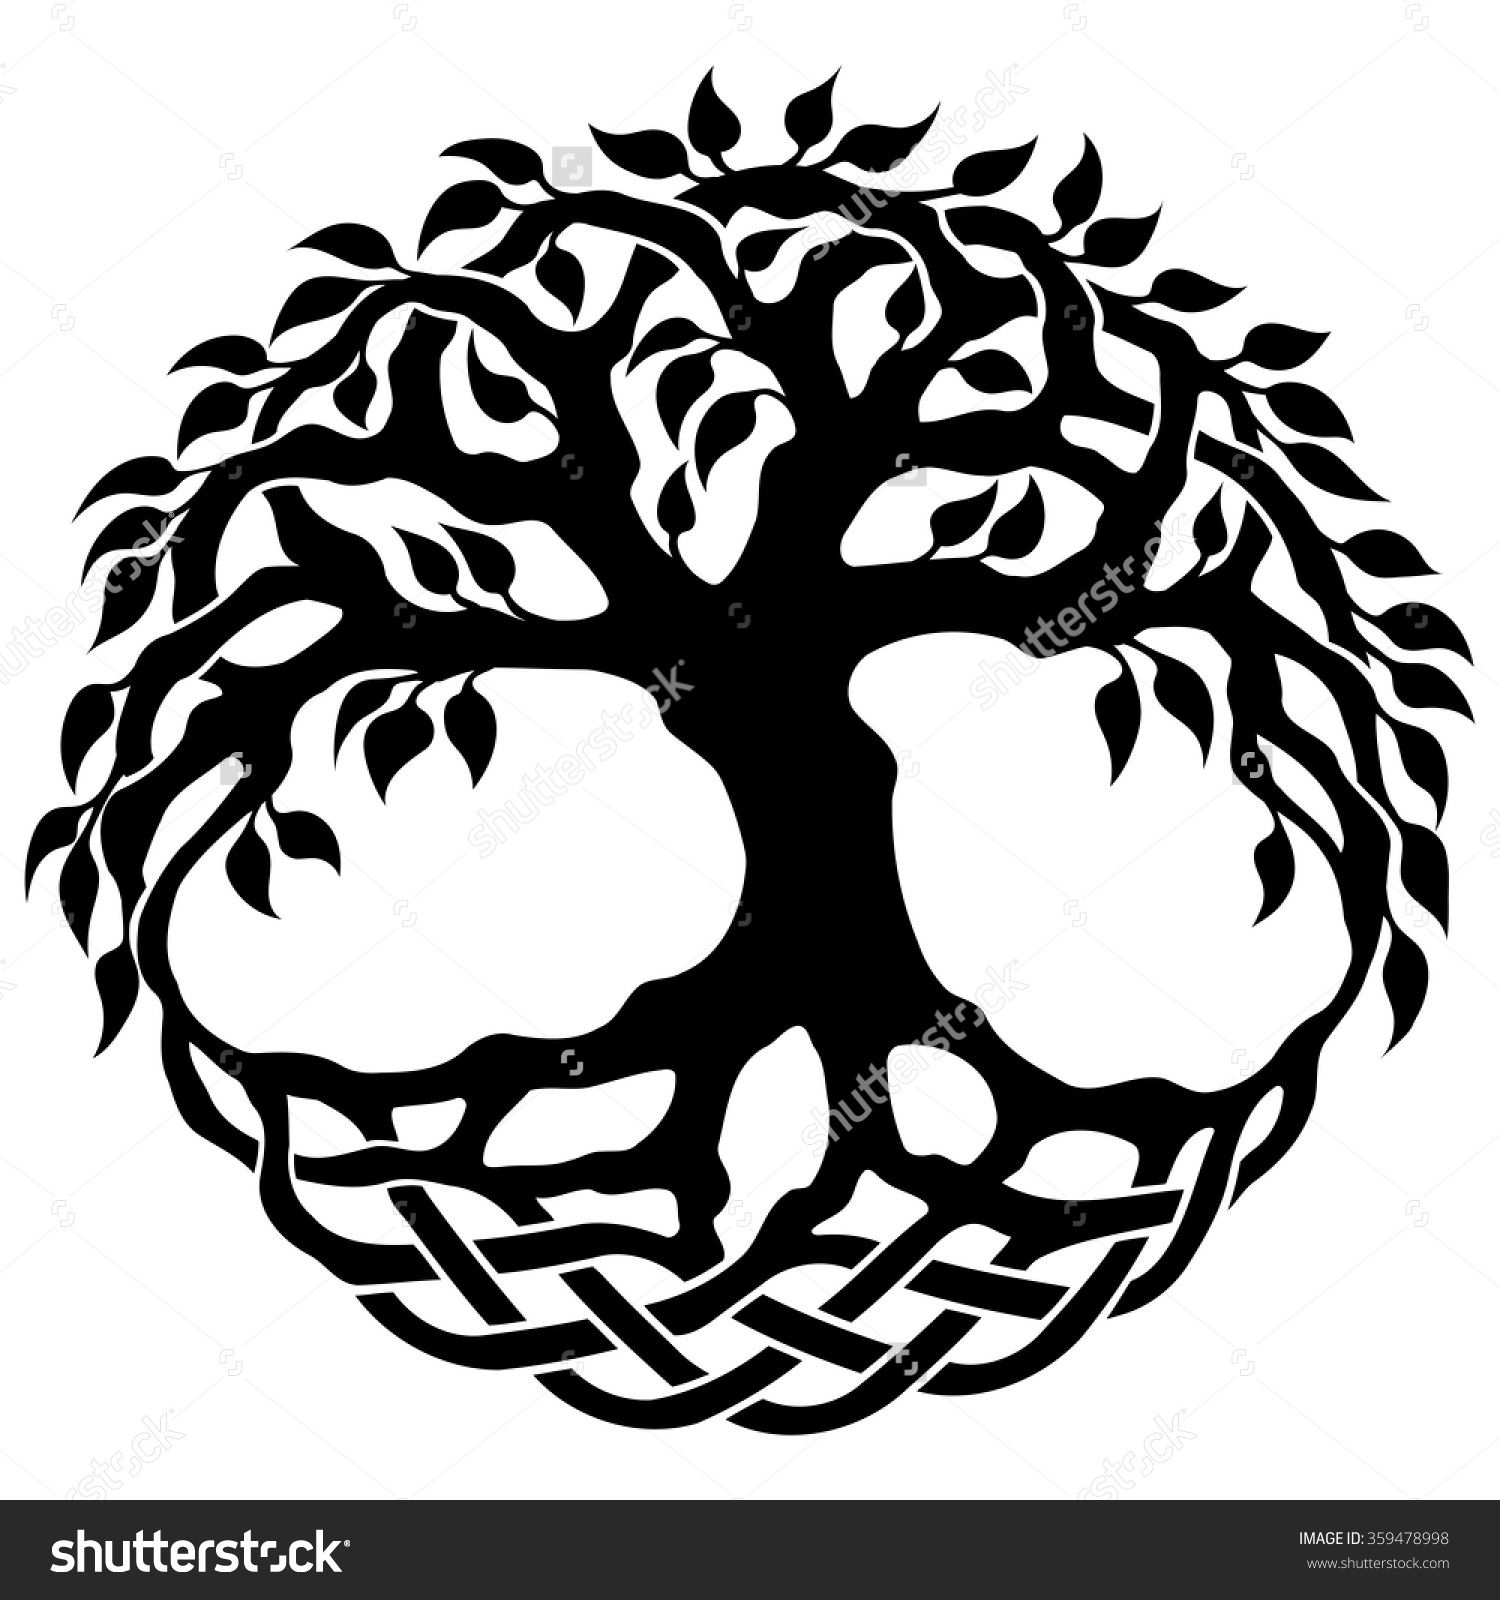 tree of life clipart vector